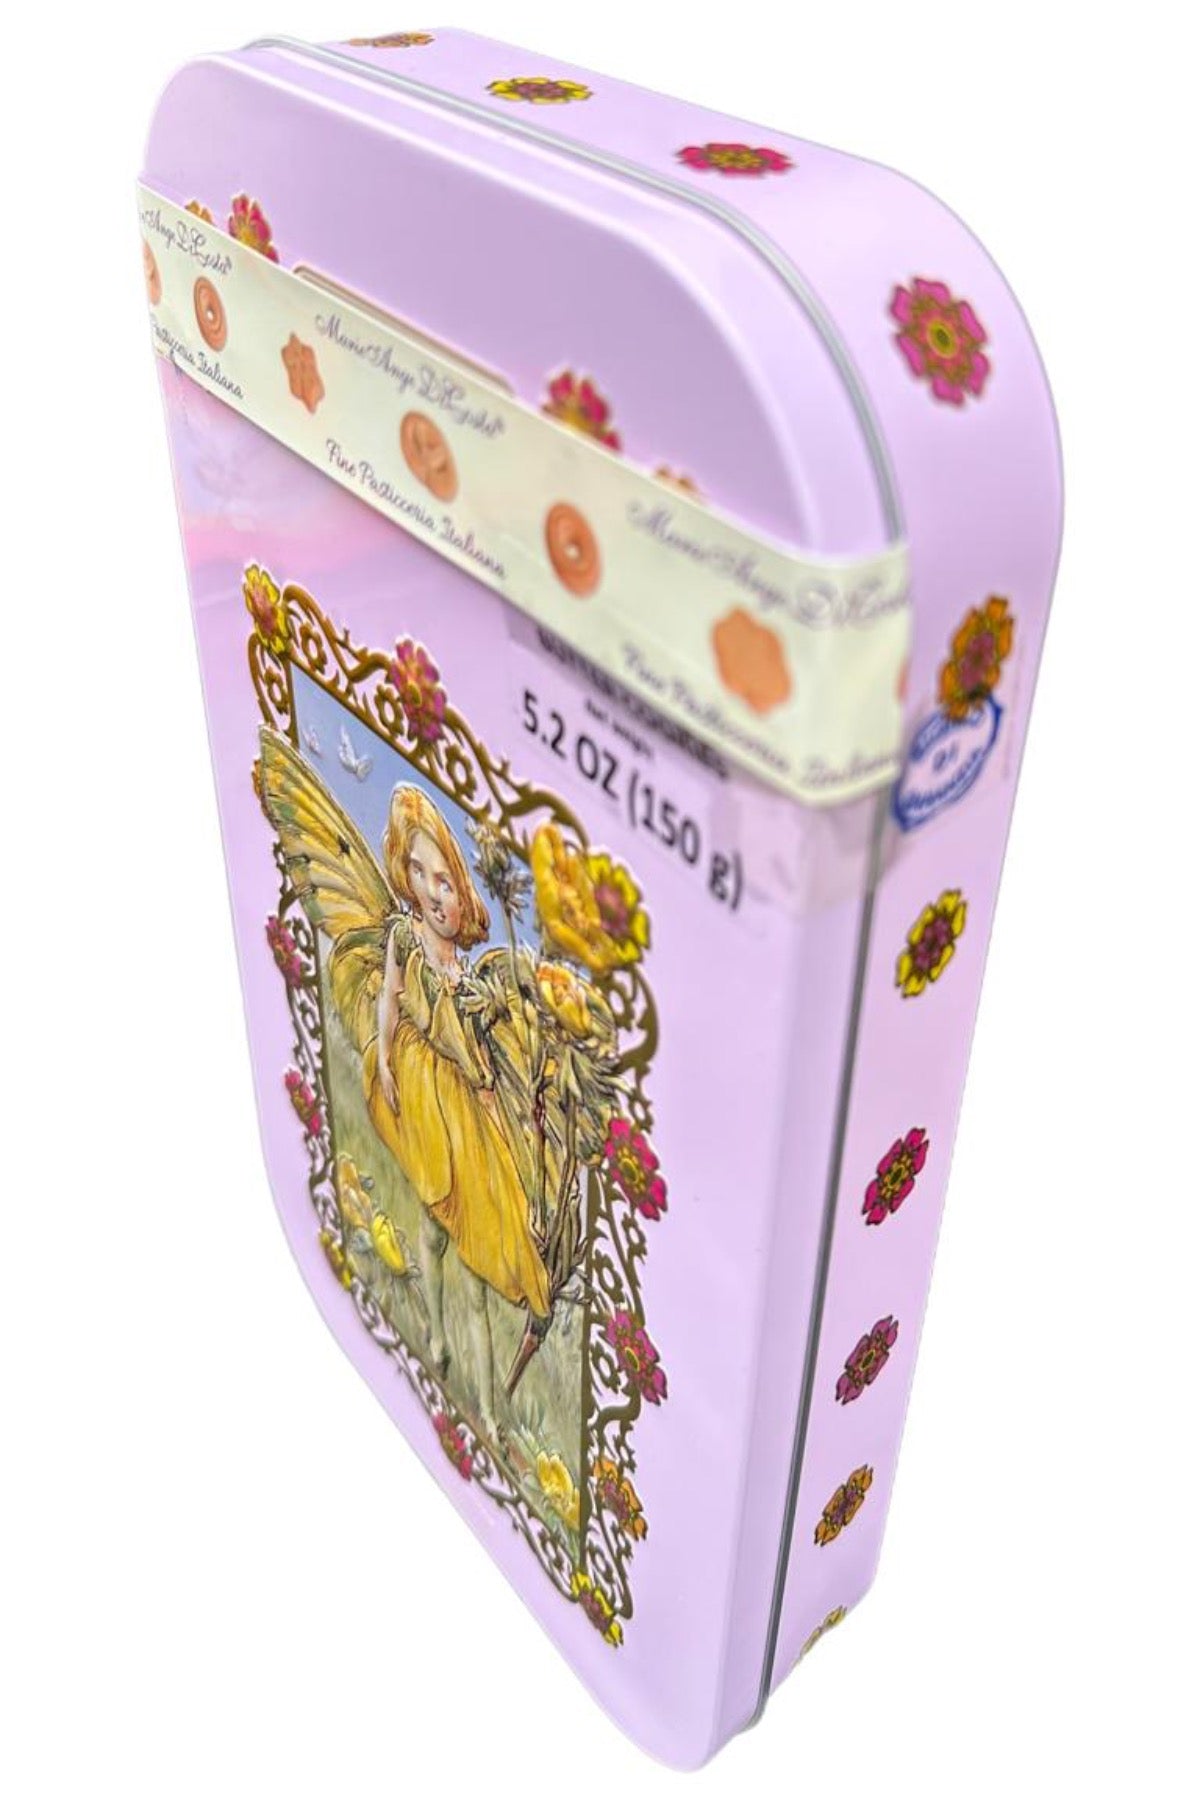 Marie Ange di Costa Italian Tin with Butter Biscuits—The Magra Rectangle in Pink 140g